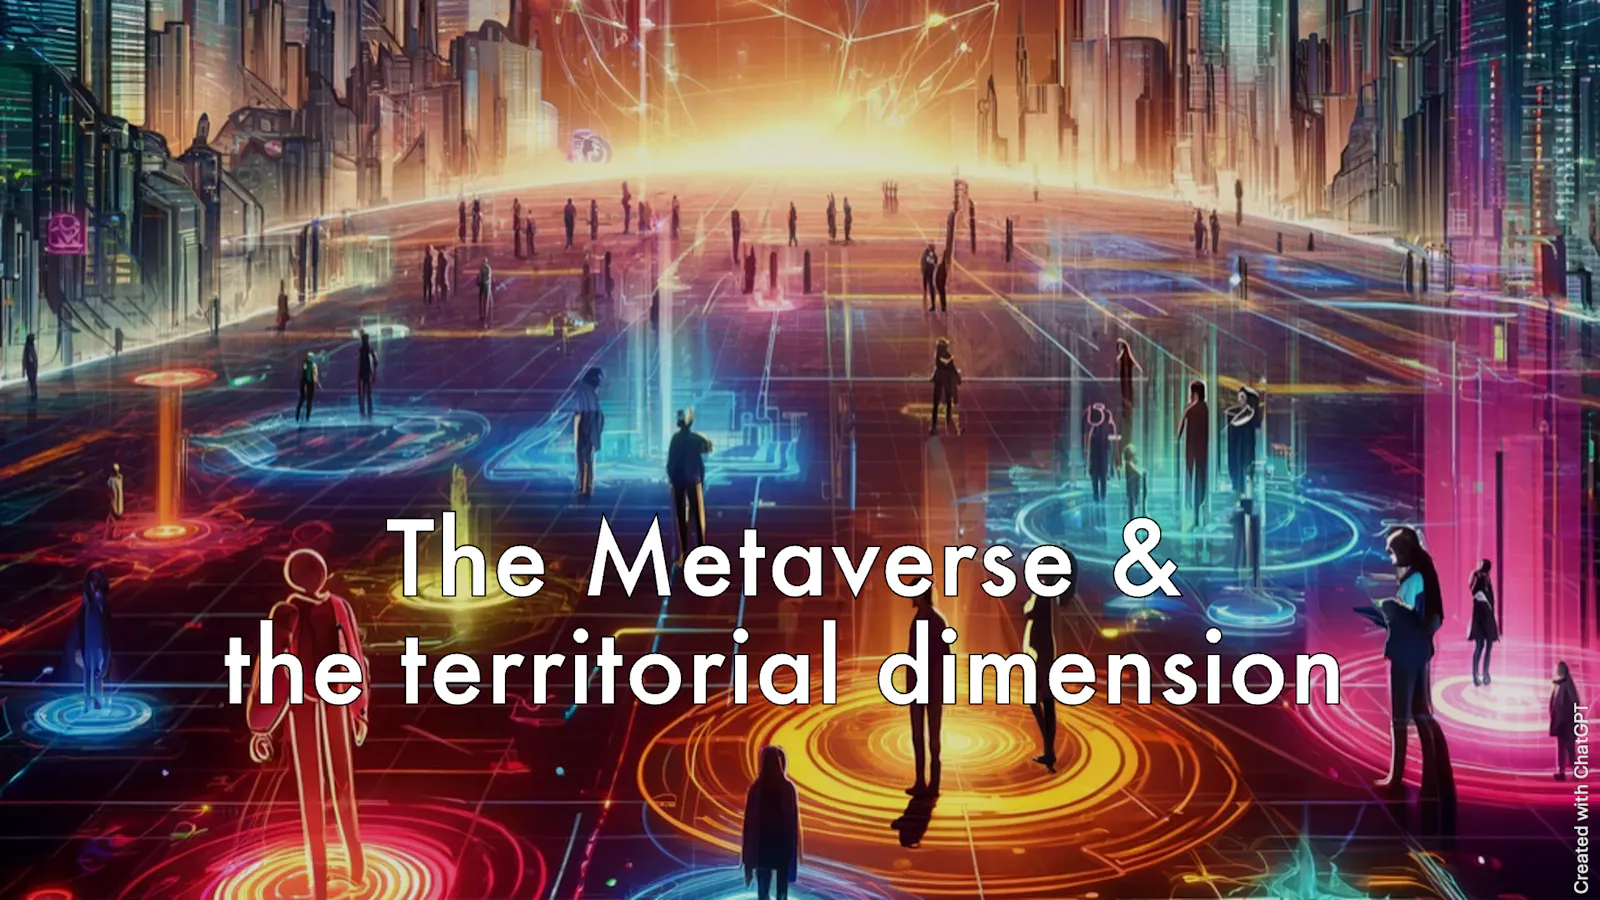 Is there a territorial dimension to the Metaverse?